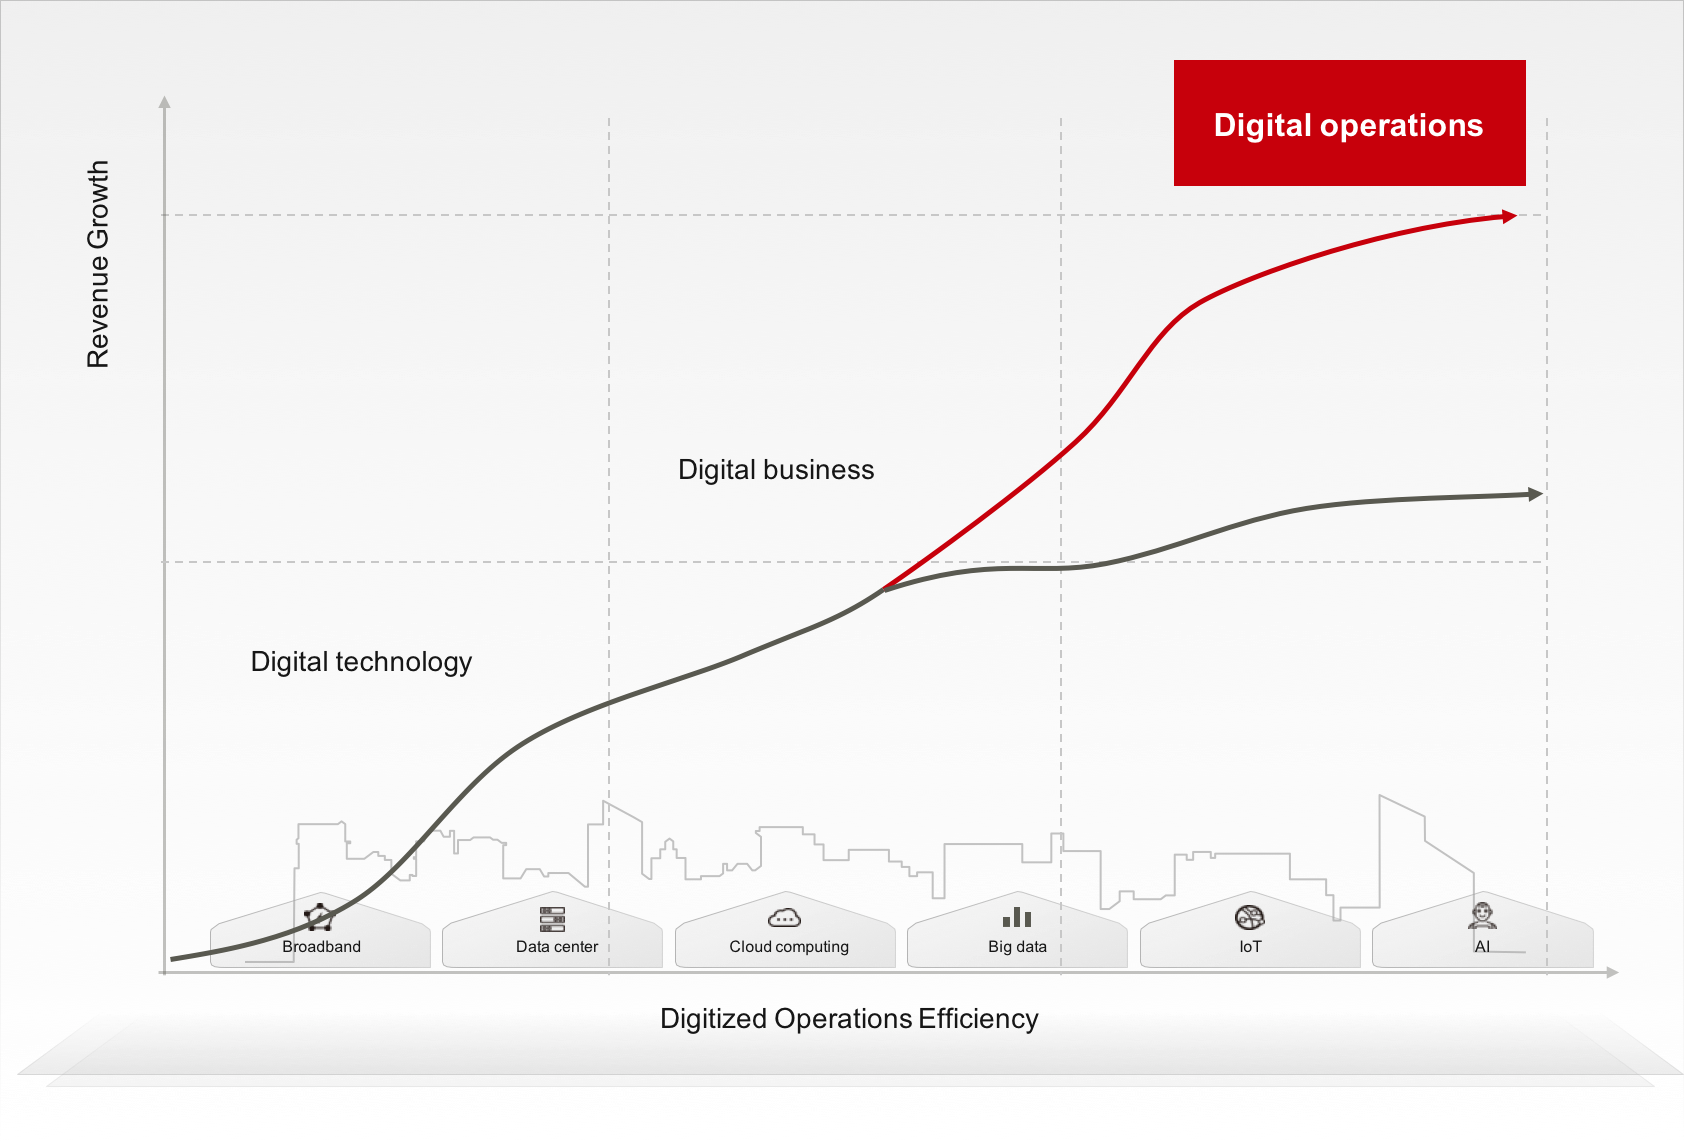 A graph that displays the correlation between digitalized operations efficiency and revenue growth